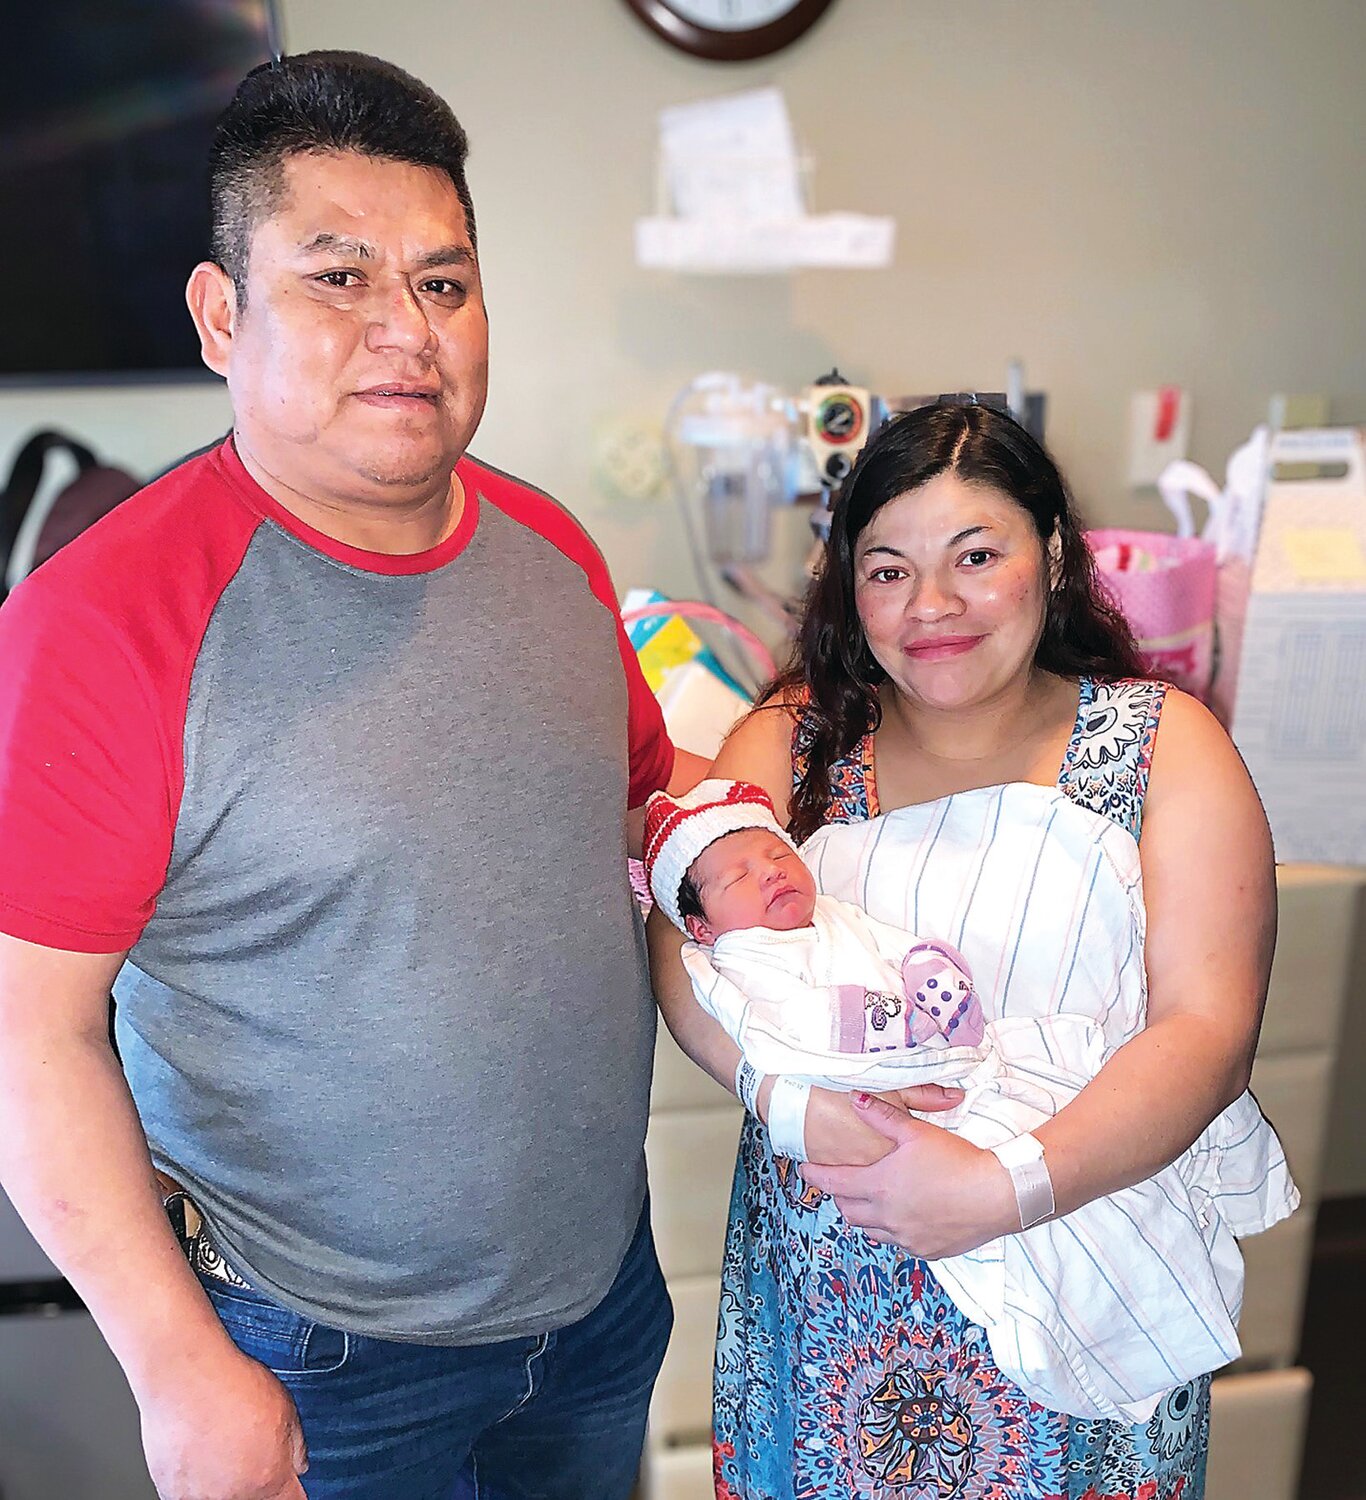 Gabino and Maria Gonzalez of Pittstown, NJ are the proud parents of a baby girl, Xochitl Roxana Vilchis Coj, who was born at 2:07 am on January 1, 2024, at Hunterdon Medical Center. Xochitl, the couple’s third child, weighed 6 pounds and 7.2 ounces and was 19 inches long.